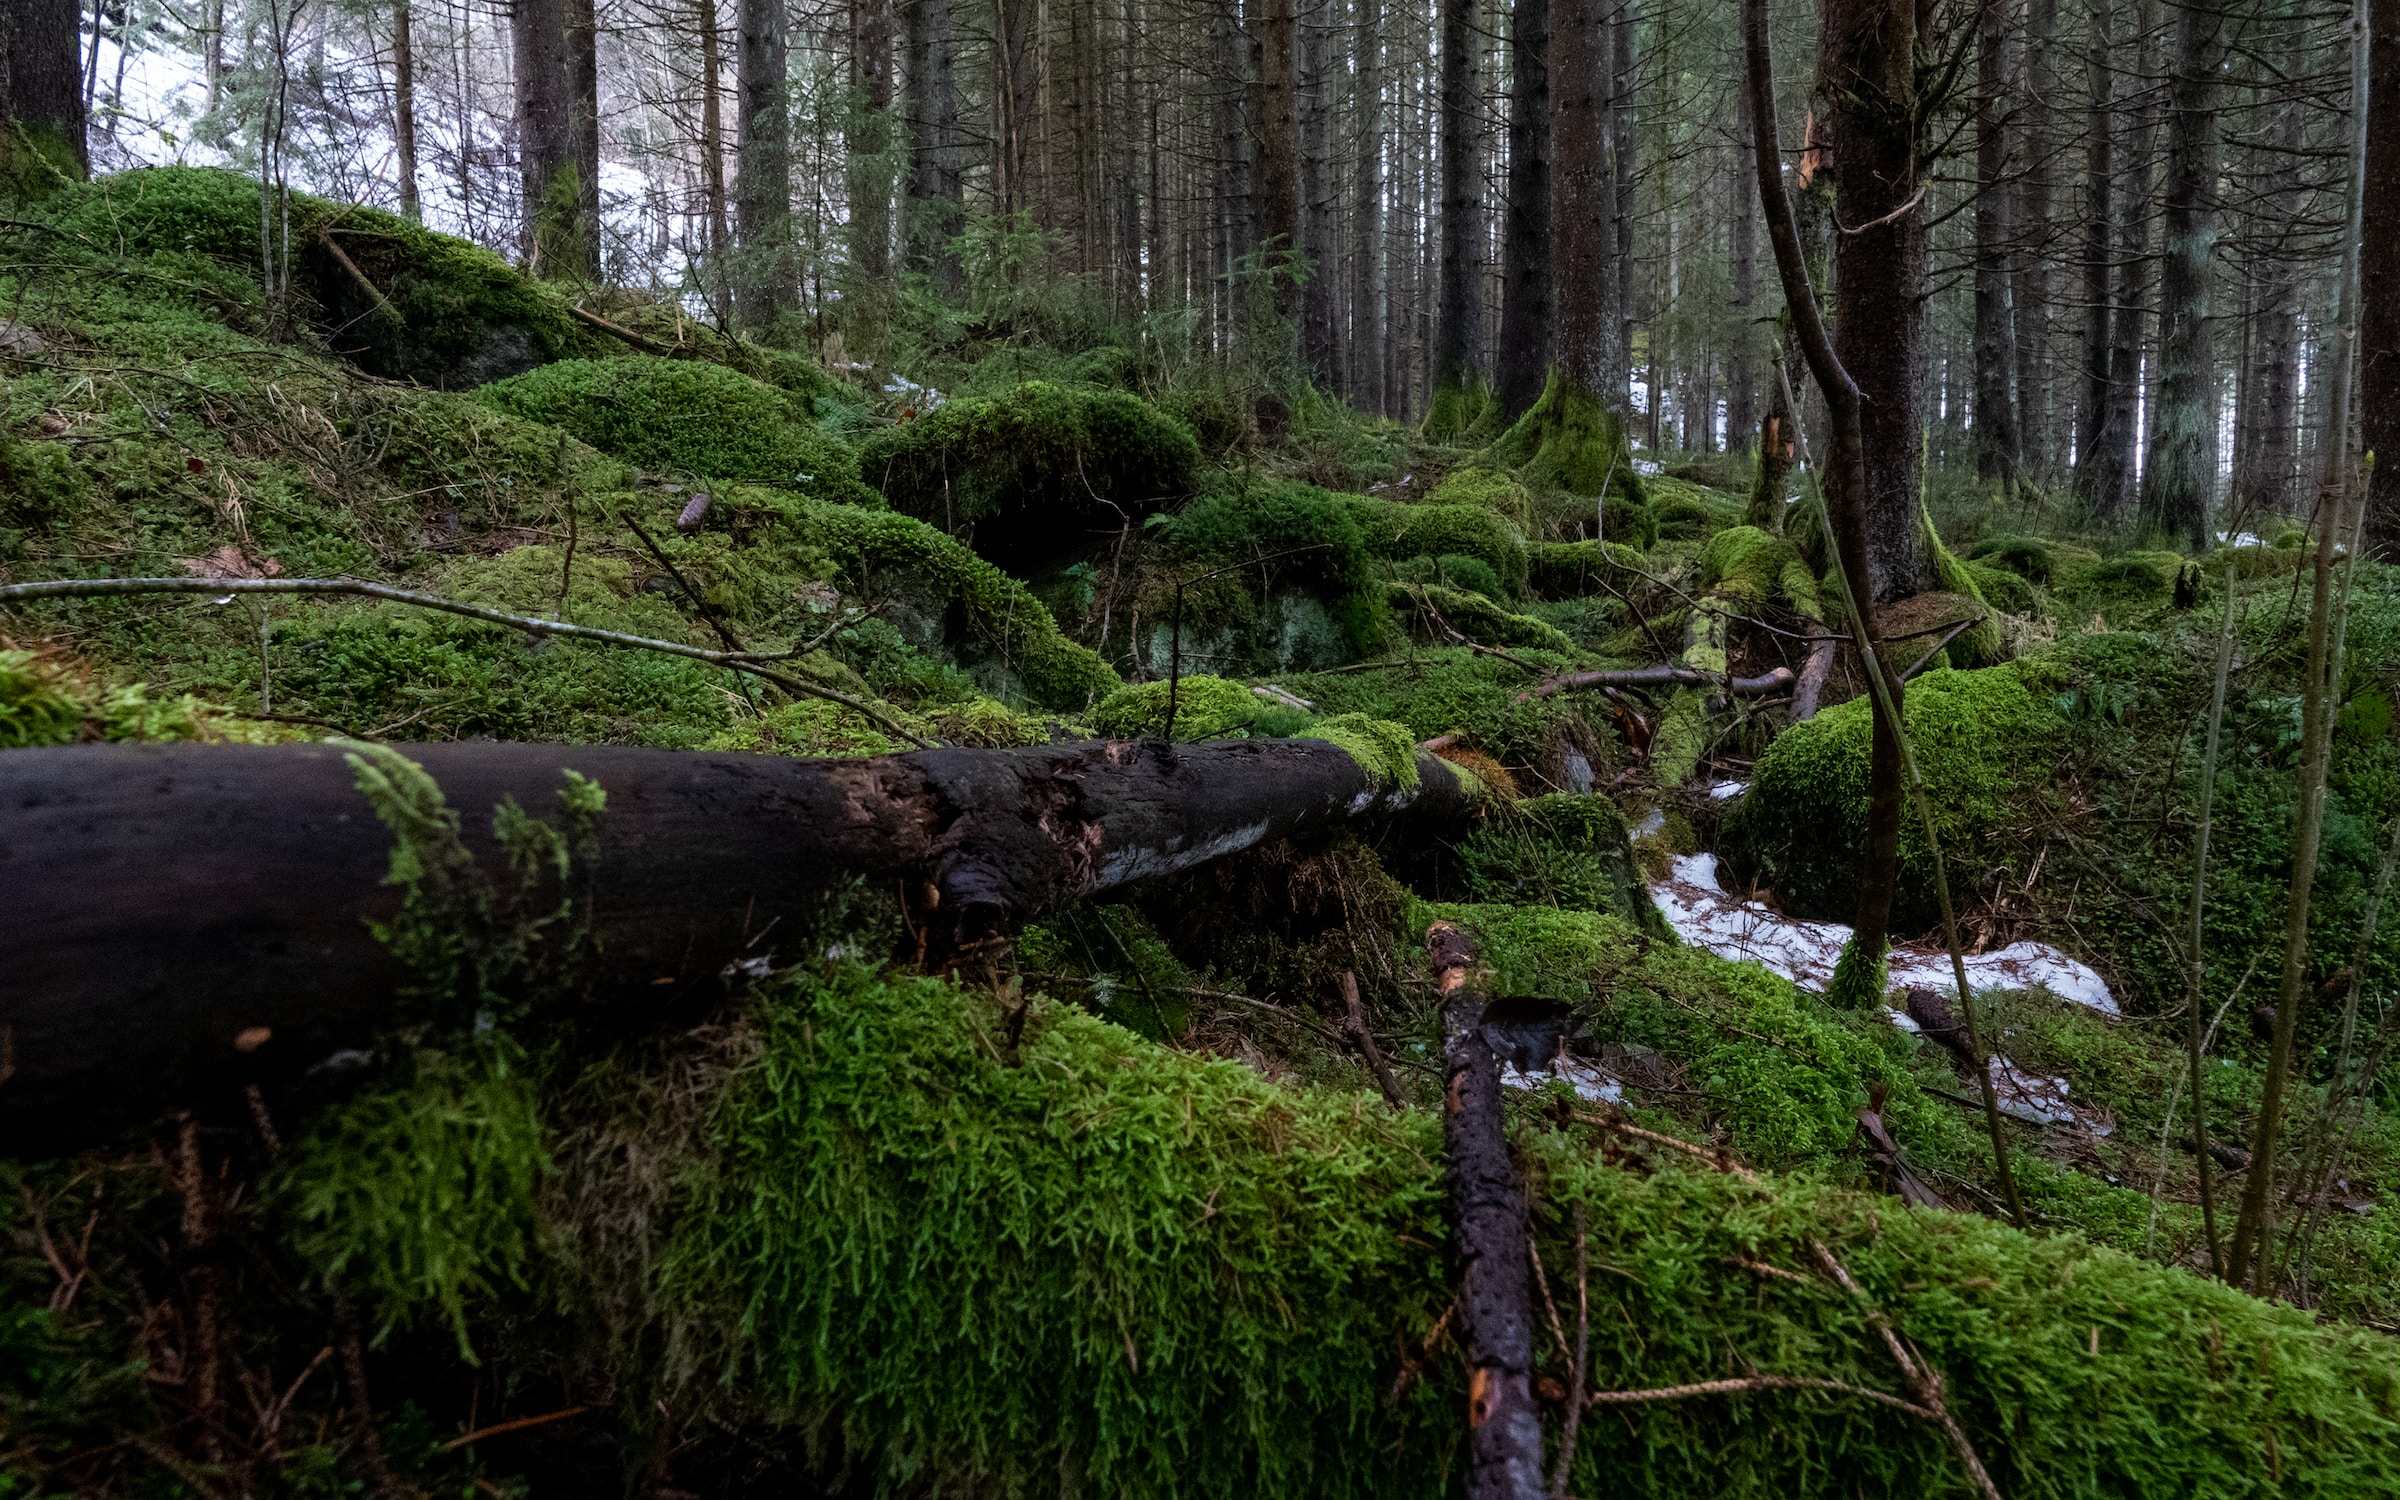 picture of the forest with moss and fallen trees. there is a little bit of snow between the trees